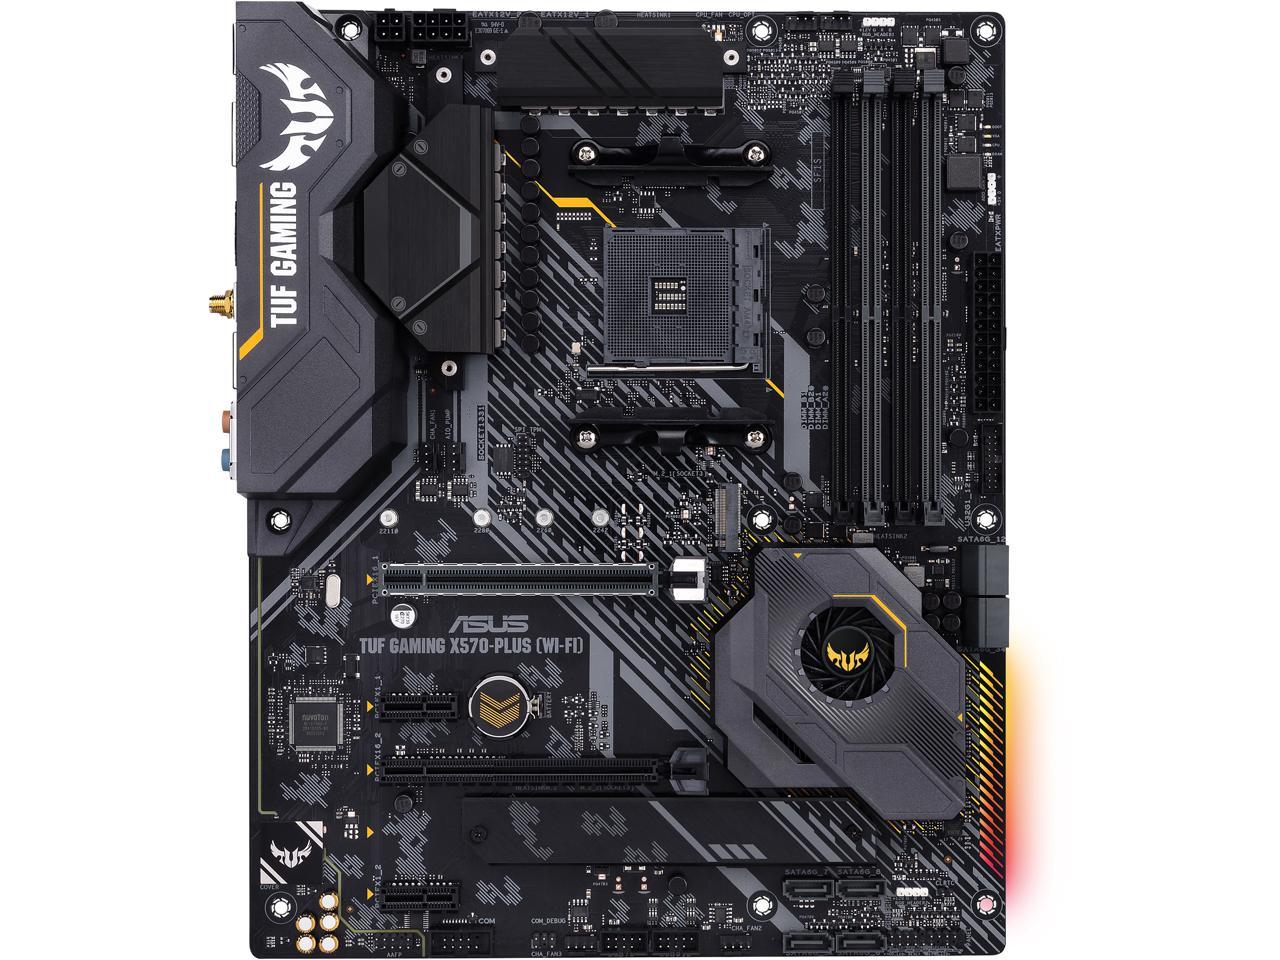 ASUS AM4 TUF Gaming X570-Plus (Wi-Fi) ATX Motherboard with PCIe 4.0, Dual M.2, 12+2 with Dr. MOS Power Stage, HDMI, DP, SATA 6Gb/s, USB 3.2 Gen 2 and Aura Sync RGB Lighting